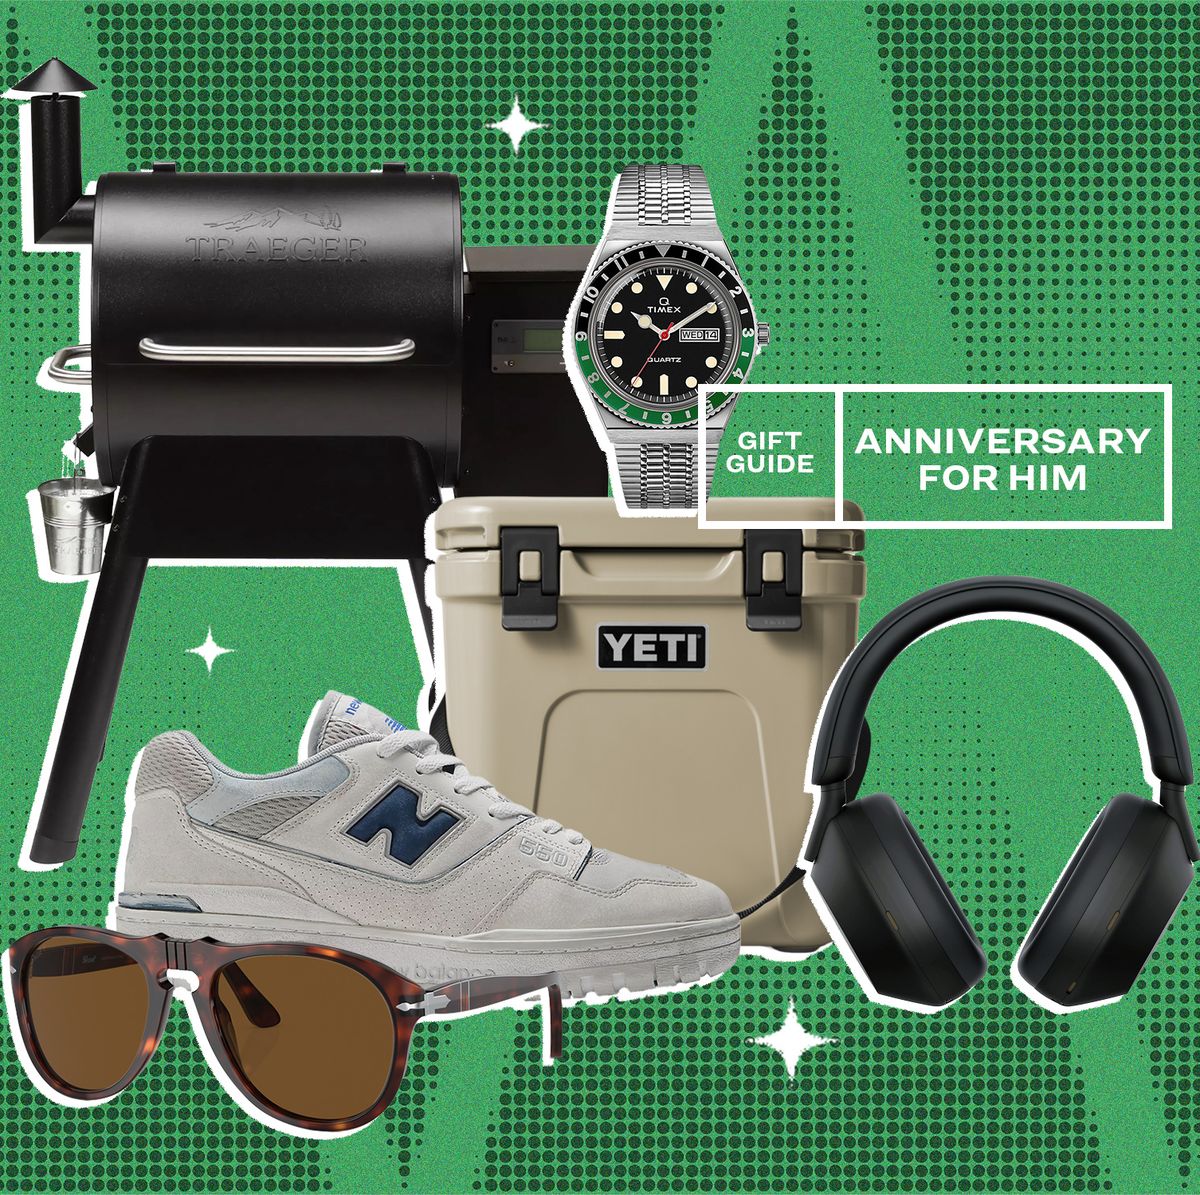 Here Are 30+ Anniversary Gifts for Him That He'll Love